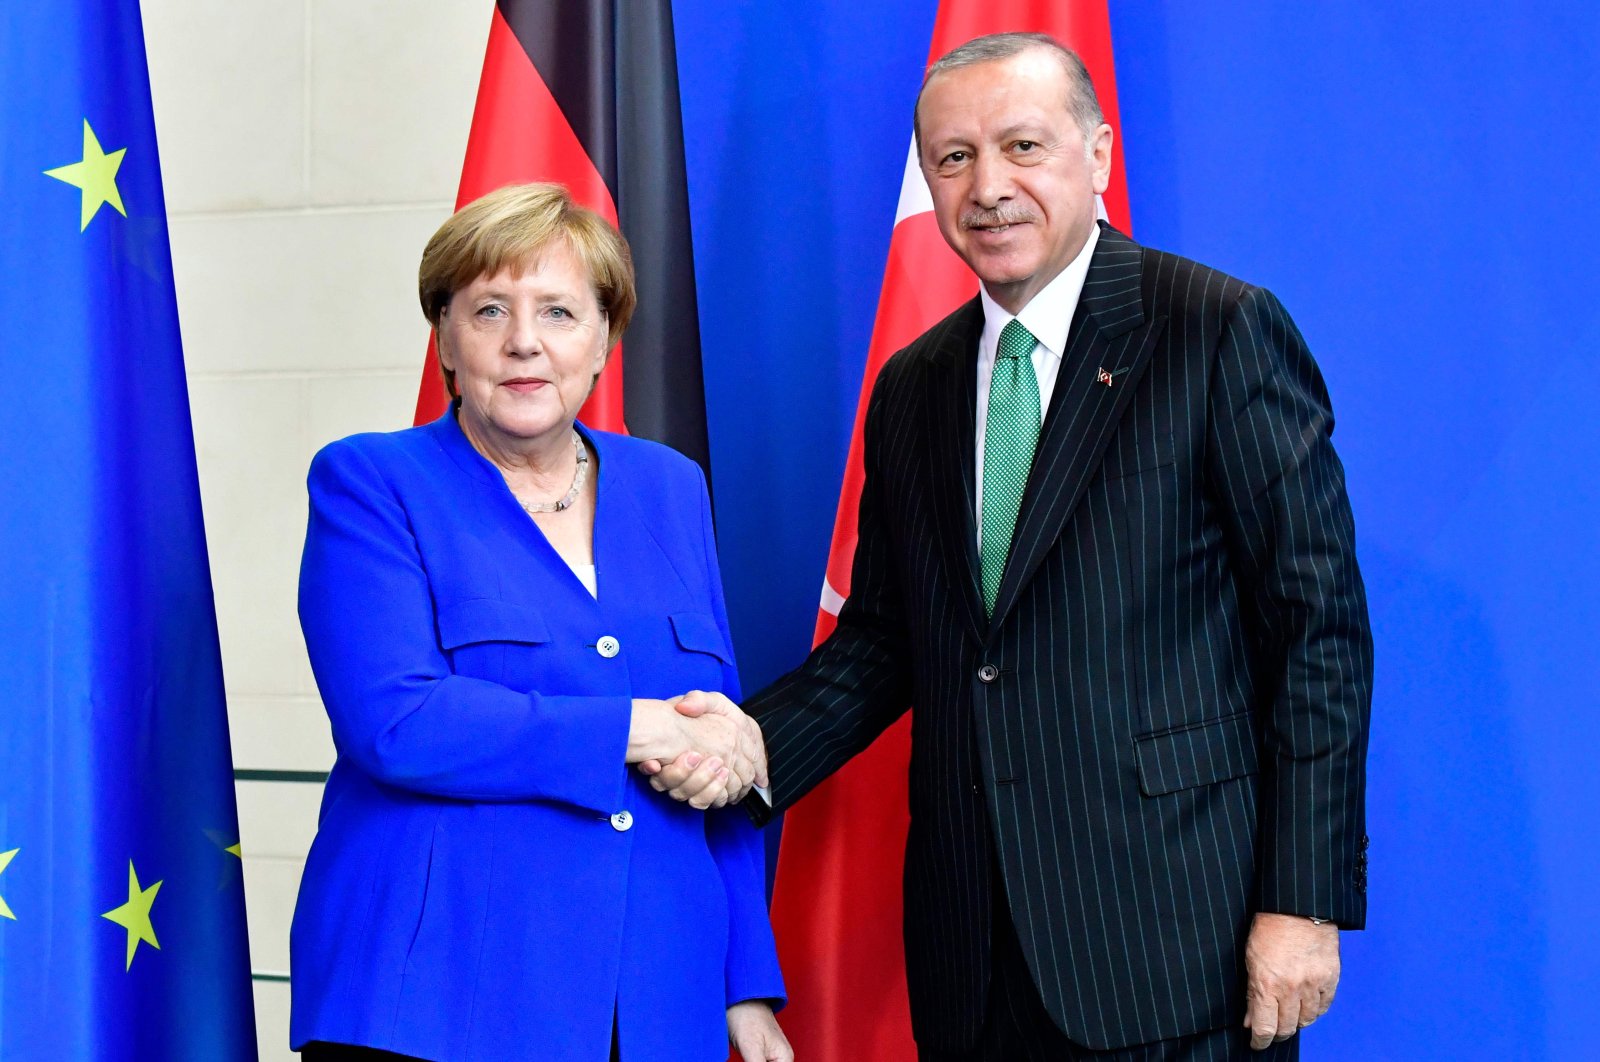 German Chancellor Angela Merkel (l) and President Recep Tayyip Erdoğan shake hands after a joint press conference after bilateral talks on September 28, 2018 at the chancellery in Berlin (AFP File Photo)